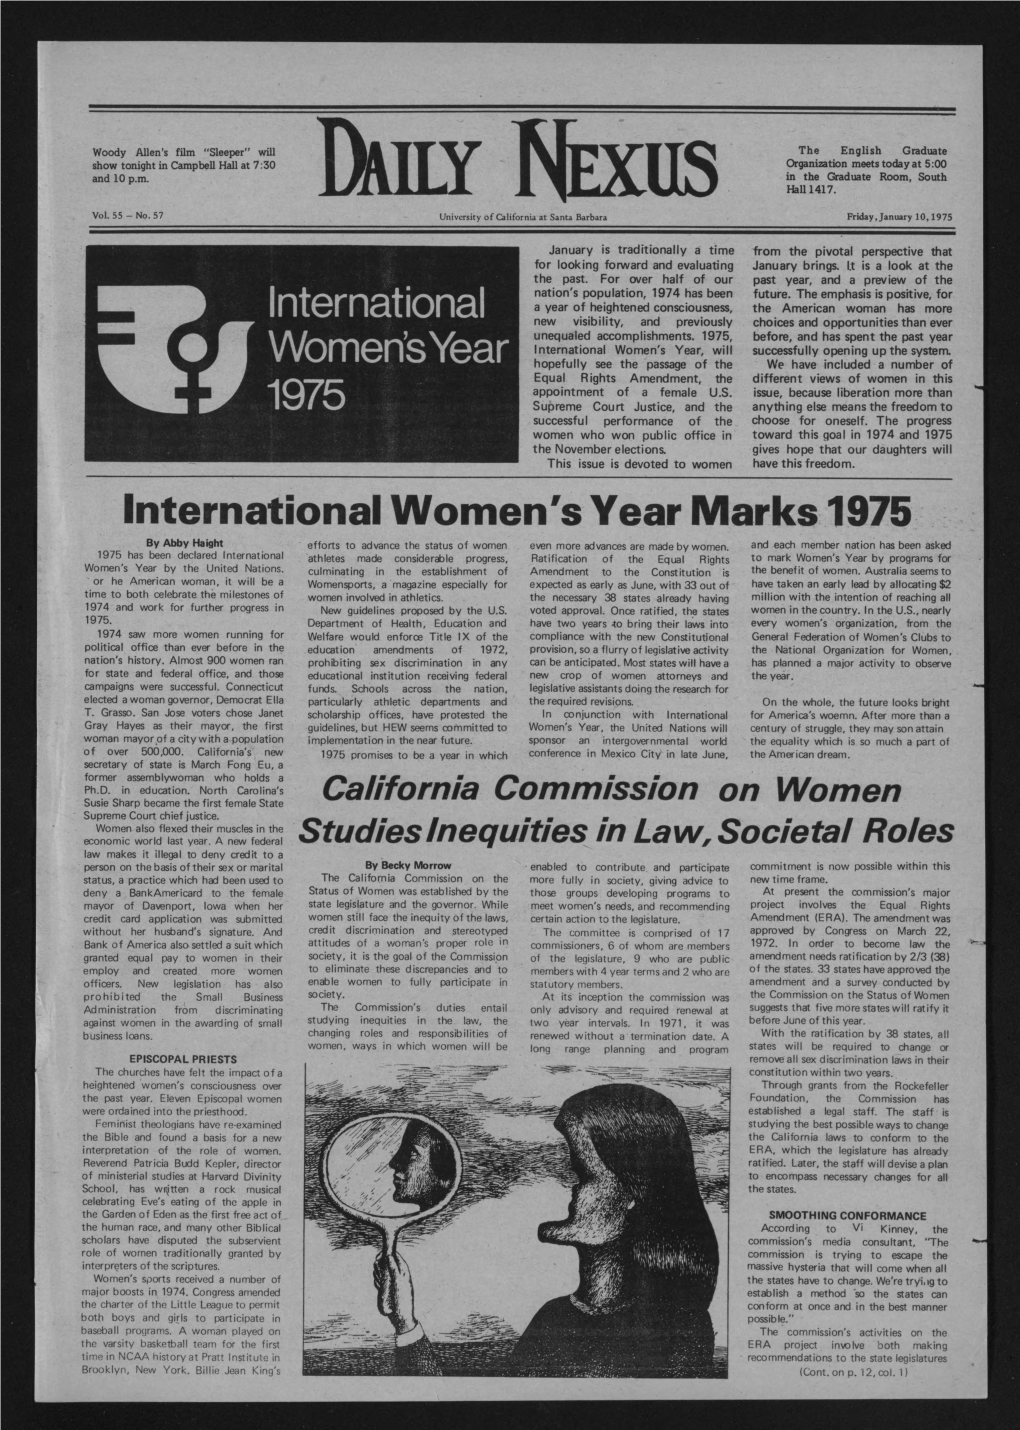 International Women's Year Marks 1975 by Abby Haight Efforts to Advance the Status of Women Even More Advances Are Made by Women